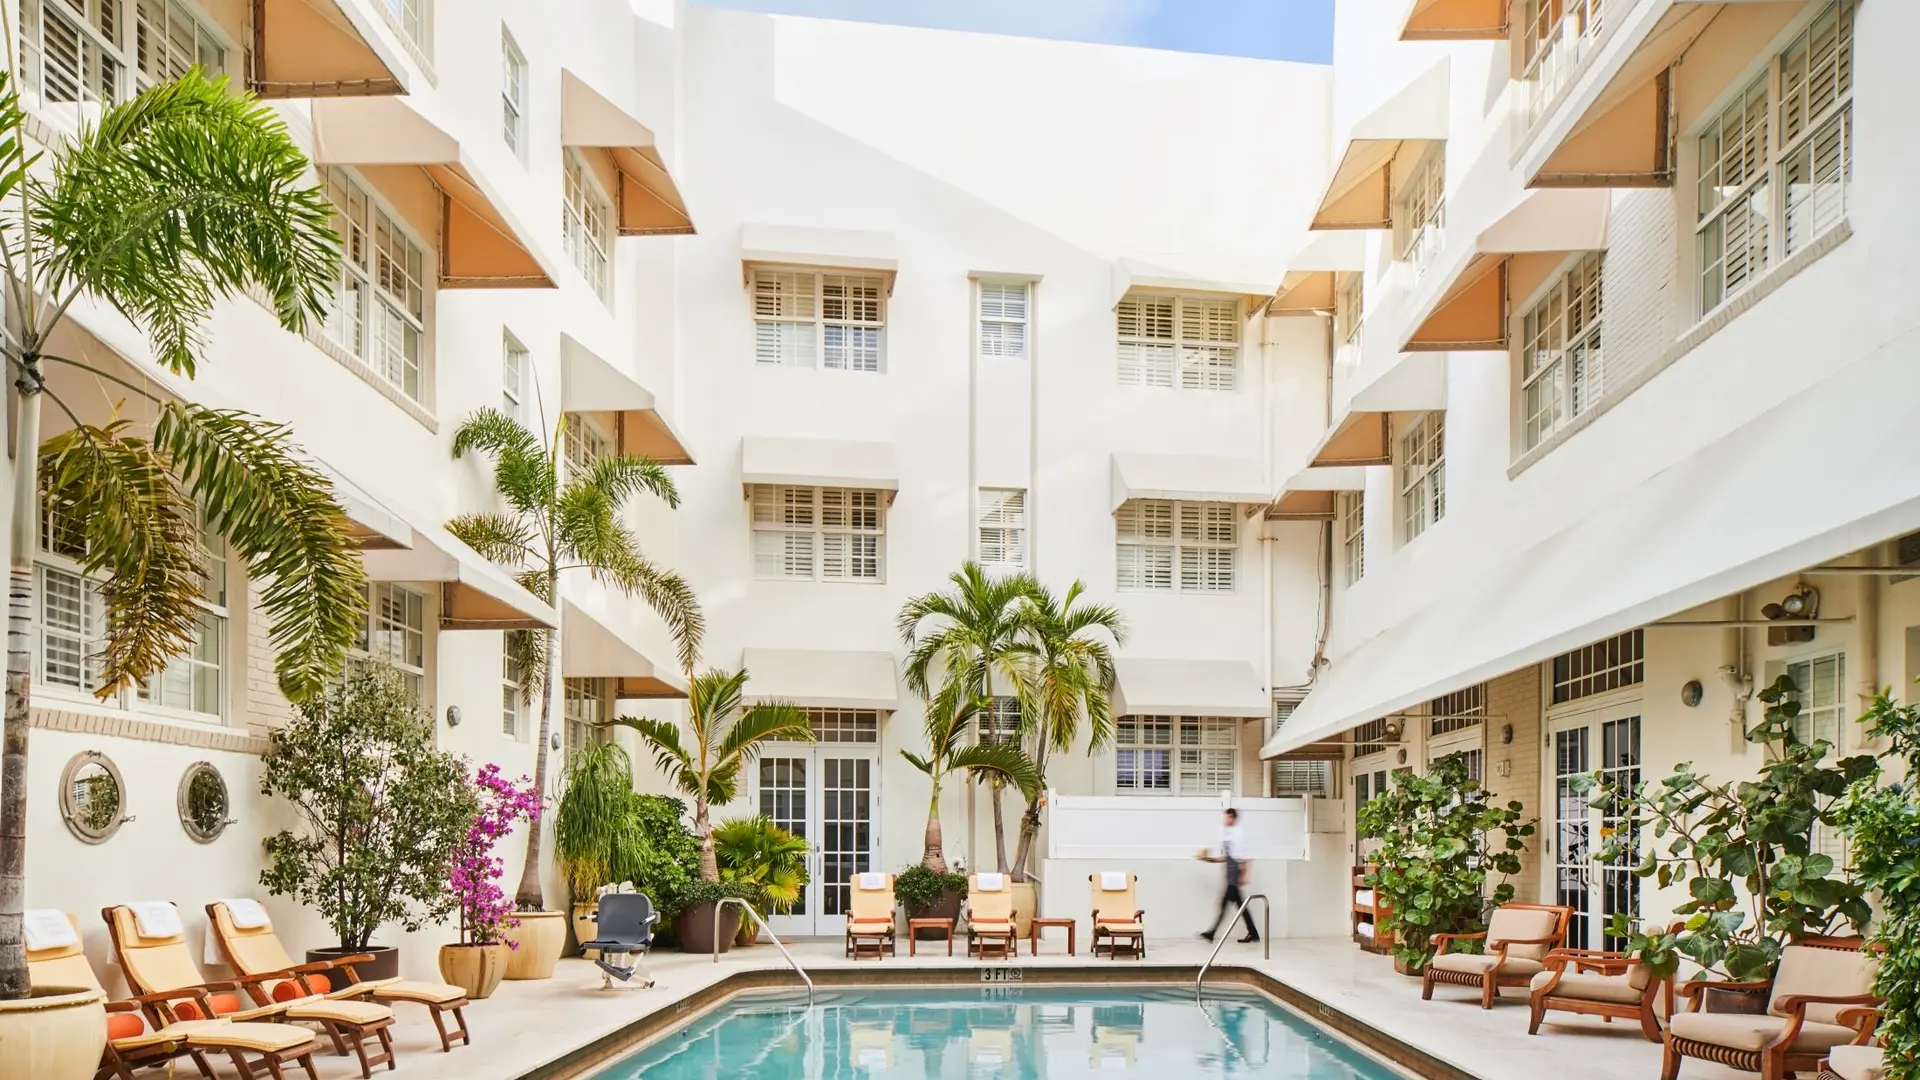 Hotel review Style' - The Betsy Hotel, South Beach - 1